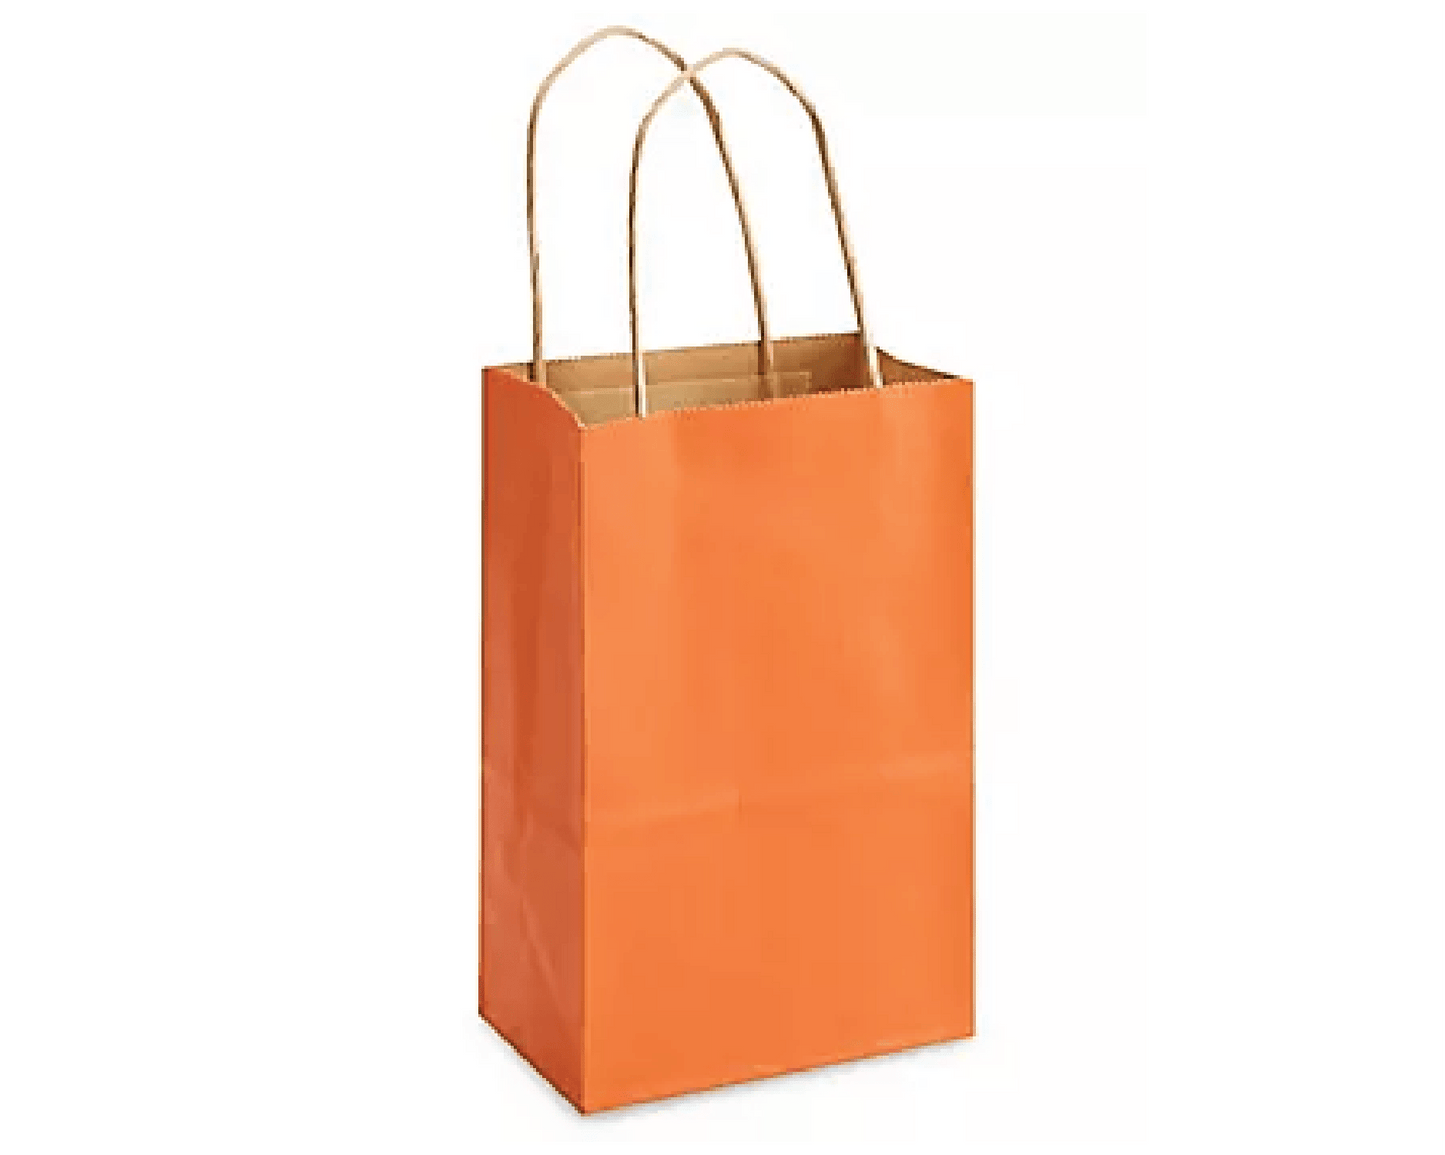 Gift Bags with Handles, Orange Favor Bags . Rose Size Shopping Bags 5-1/4" x 3-1/2" x 8-1/4" - Scrap Bits